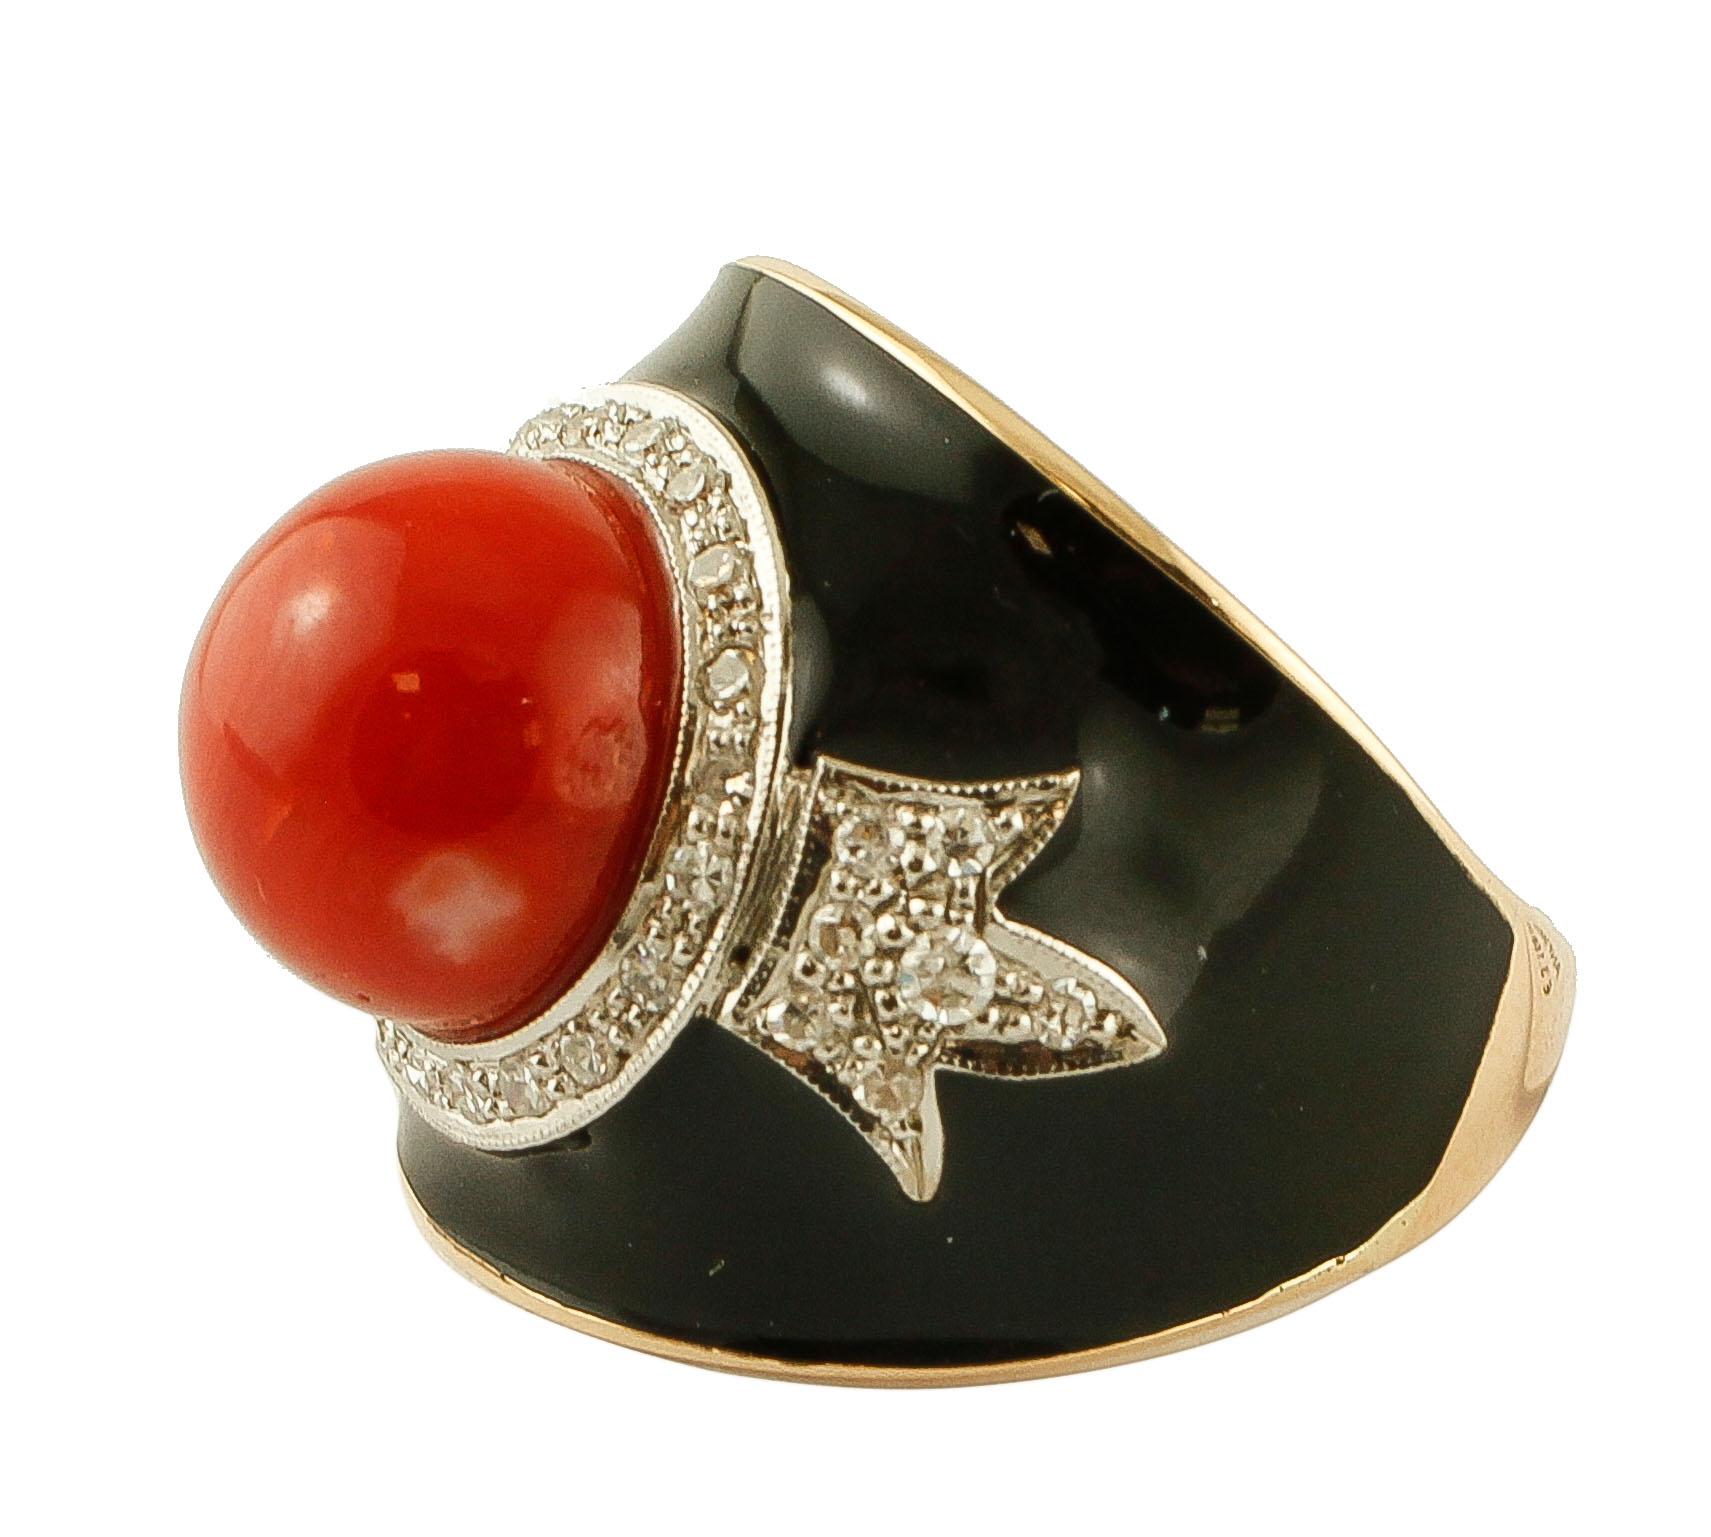 SHIPPING POLICY:
No additional costs will be added to this order.
Shipping costs will be totally covered by the seller (customs duties included).

Beautiful ring in vintage style, realized in 14k yellow gold and enamel, mounted with a central red